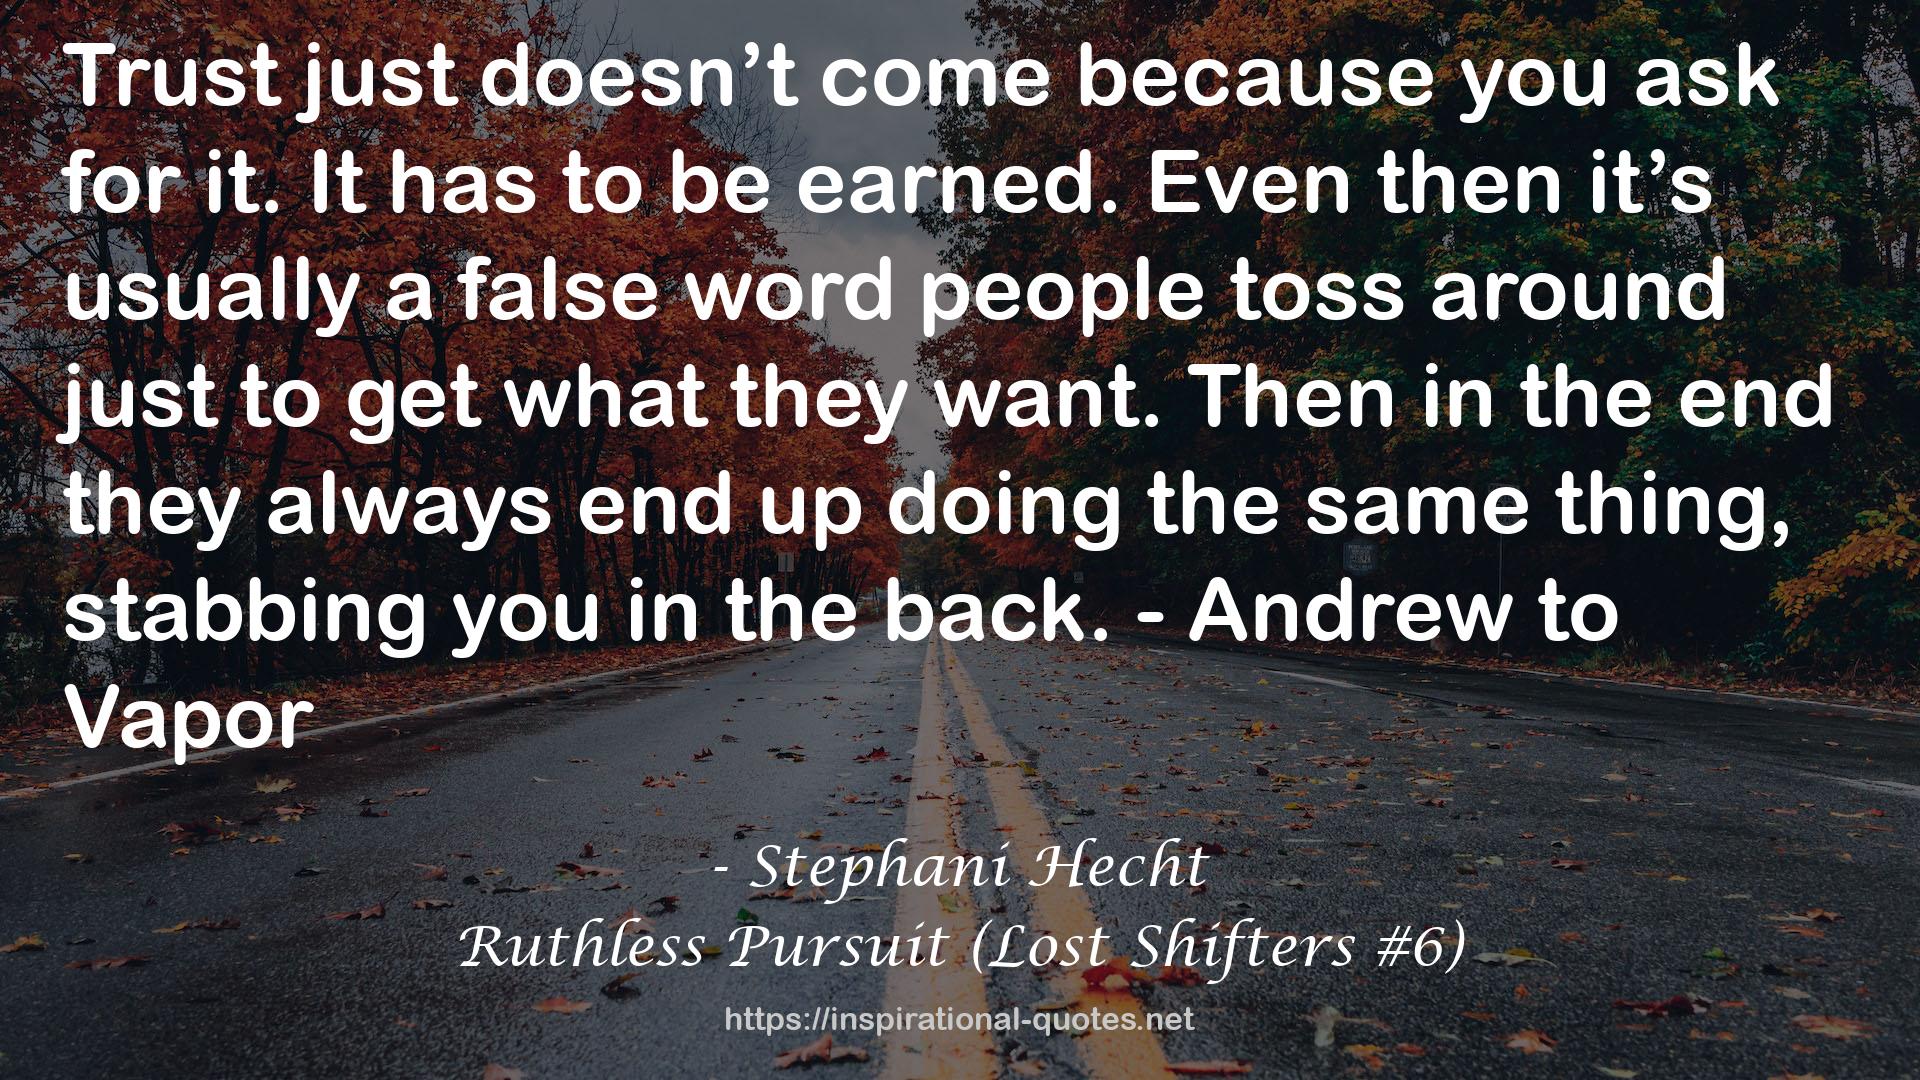 Ruthless Pursuit (Lost Shifters #6) QUOTES